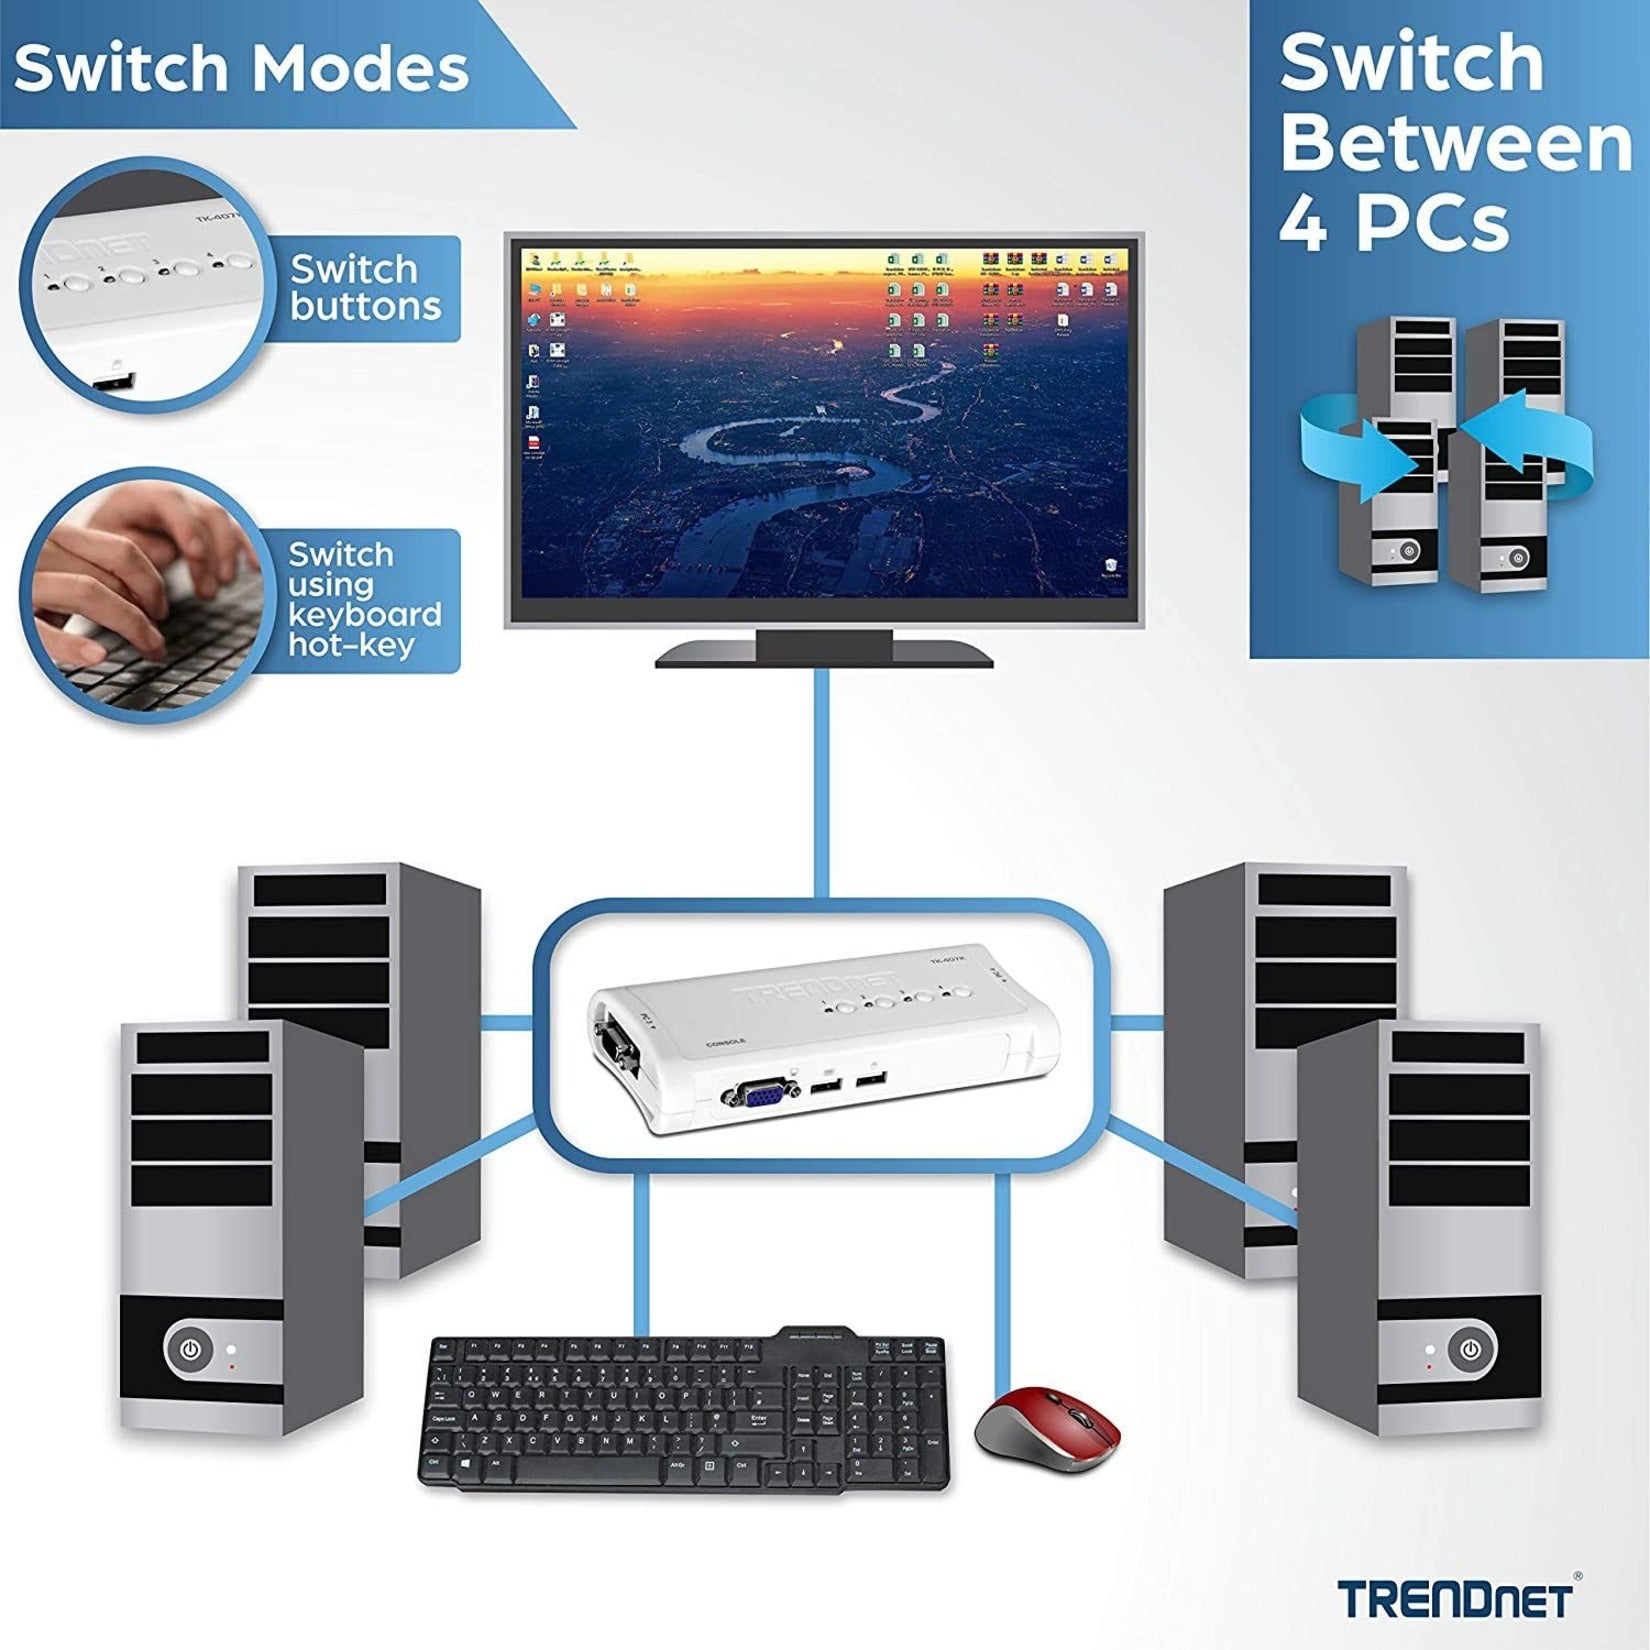 TRENDnet 4-Port USB KVM Switch Kit, VGA And USB Connections, 2048 x 1536 Resolution, Cabling Included, Control Up To 4 Computers, Compliant With Window, Linux, and Mac OS, White, TK-407K (TK-407K) Alternate-Image3 image